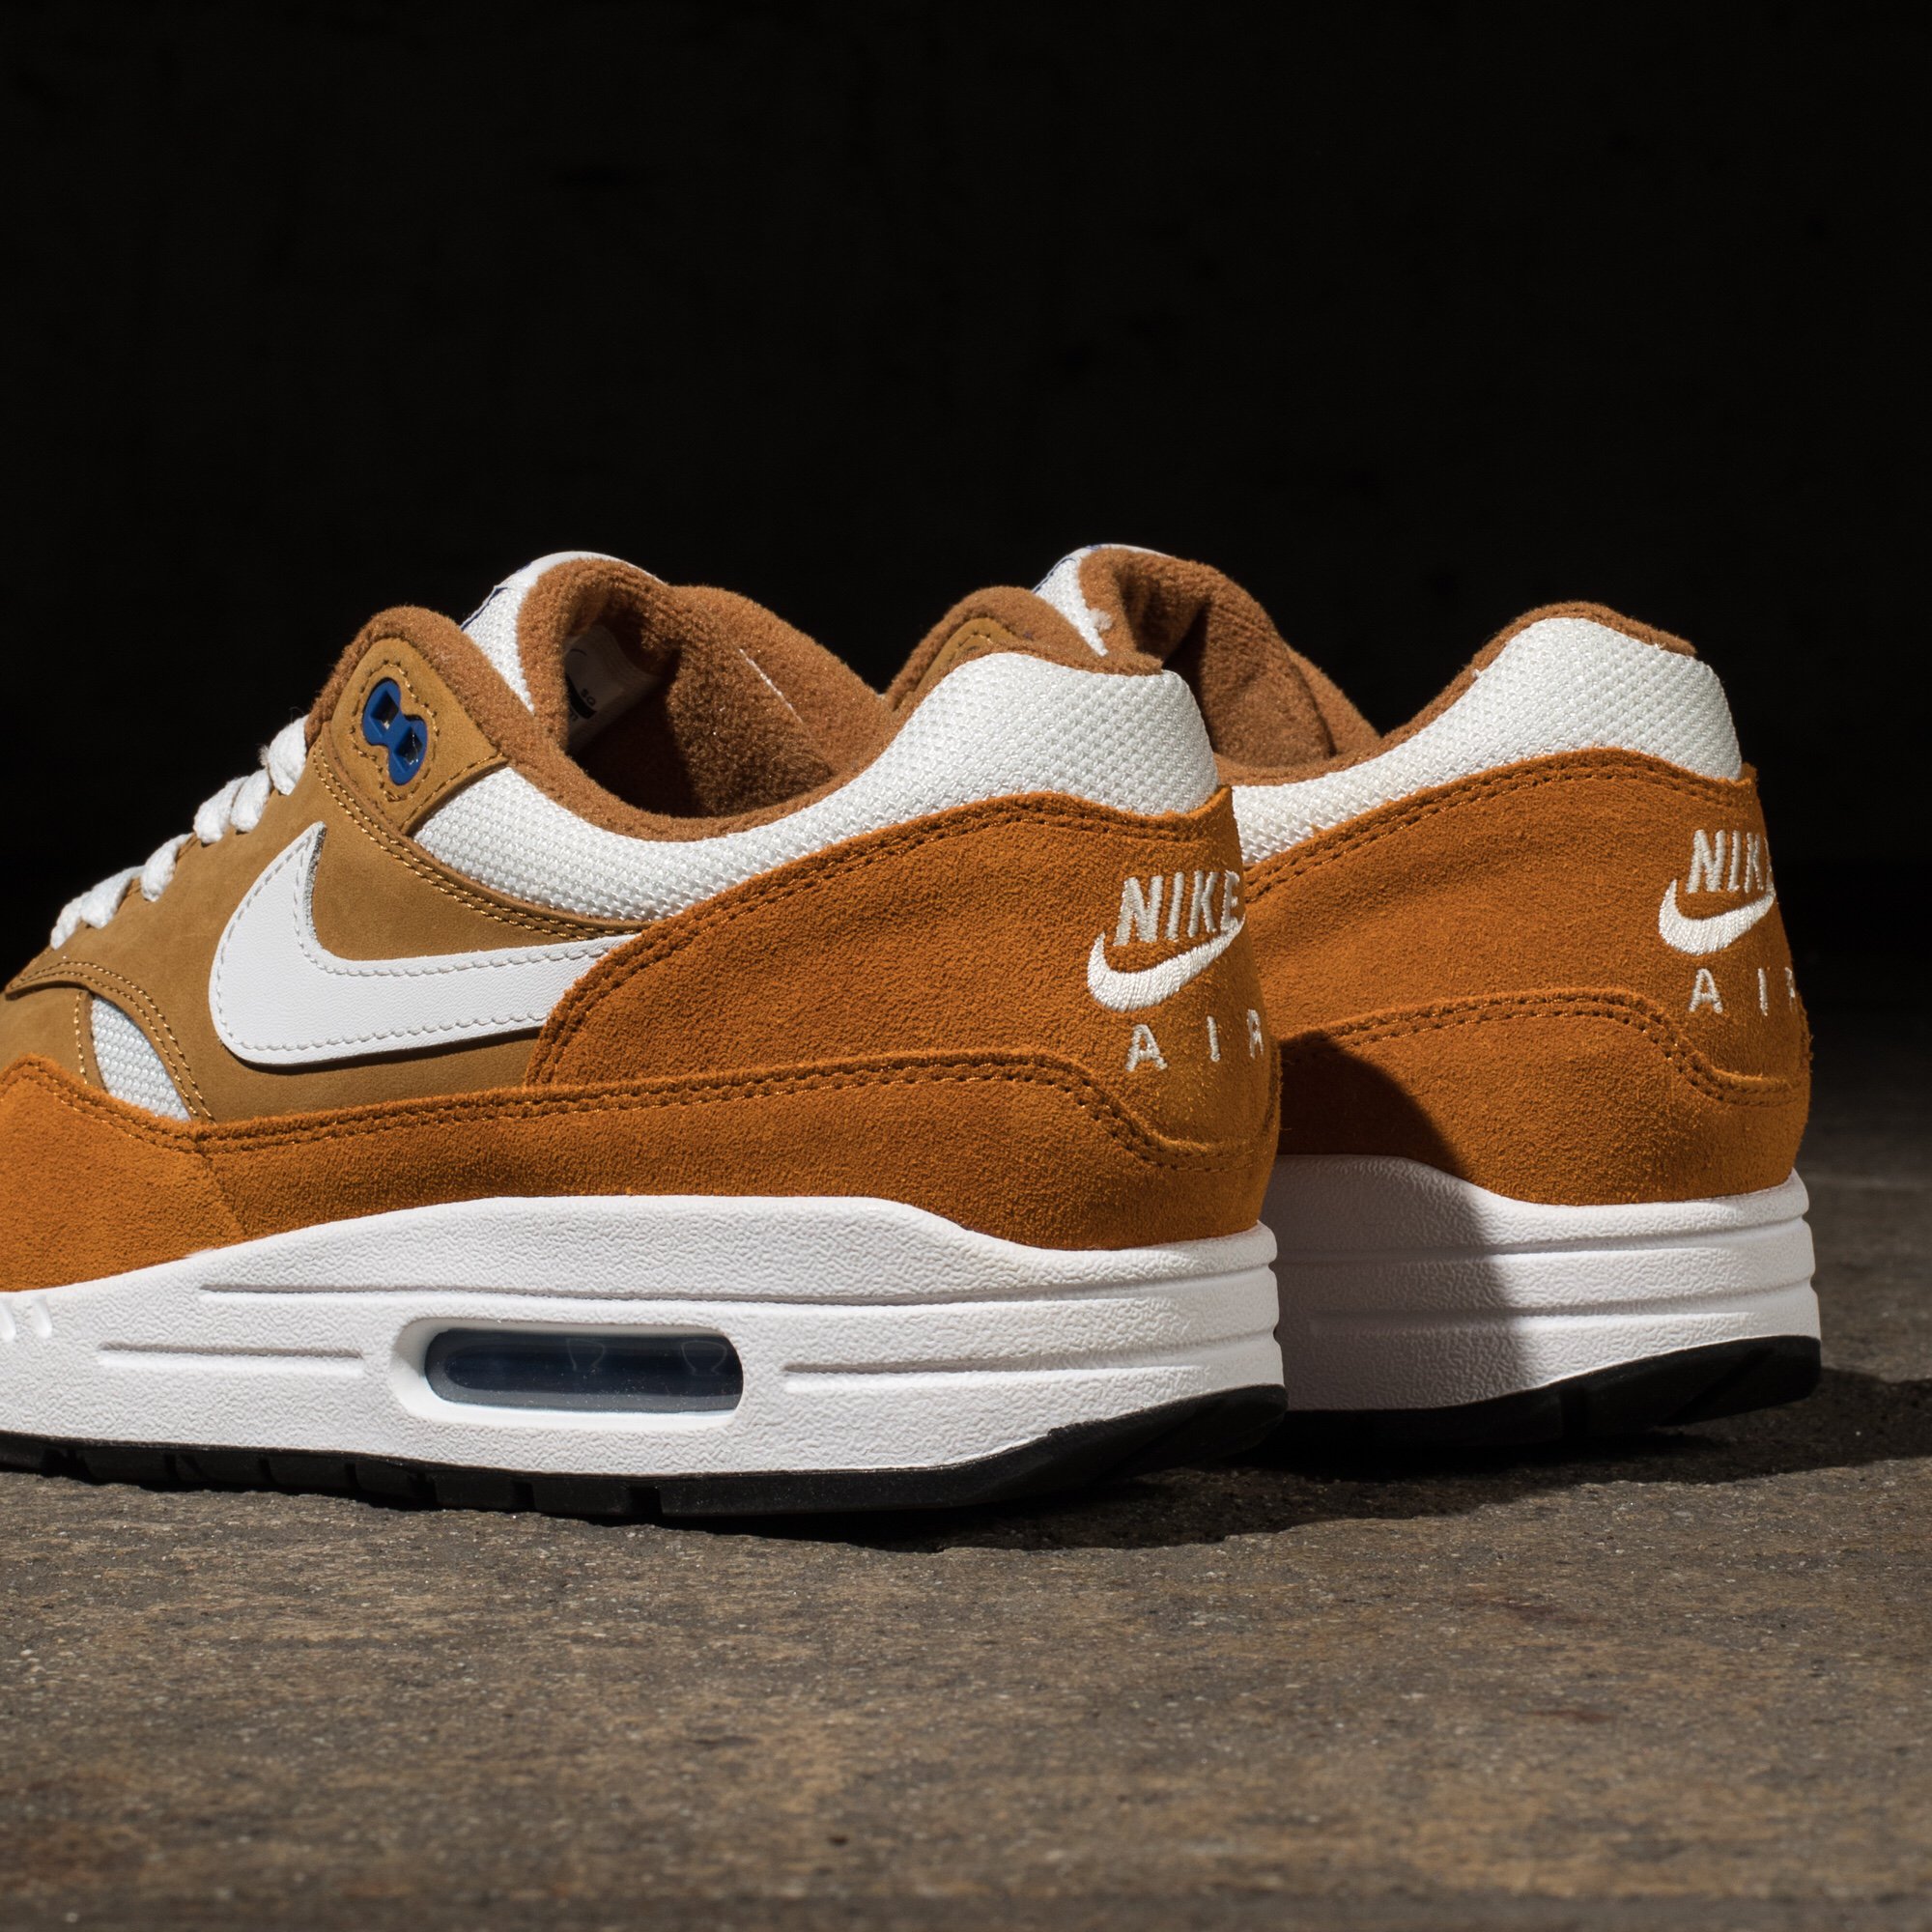 Roeispaan Paine Gillic Mening UNDEFEATED on Twitter: "Orginally released in 2003, the Atmos x Nike Air  Max 1 “Curry” became one of the most coveted sneakers for Air Max  enthusiasts. Now for the first time, the